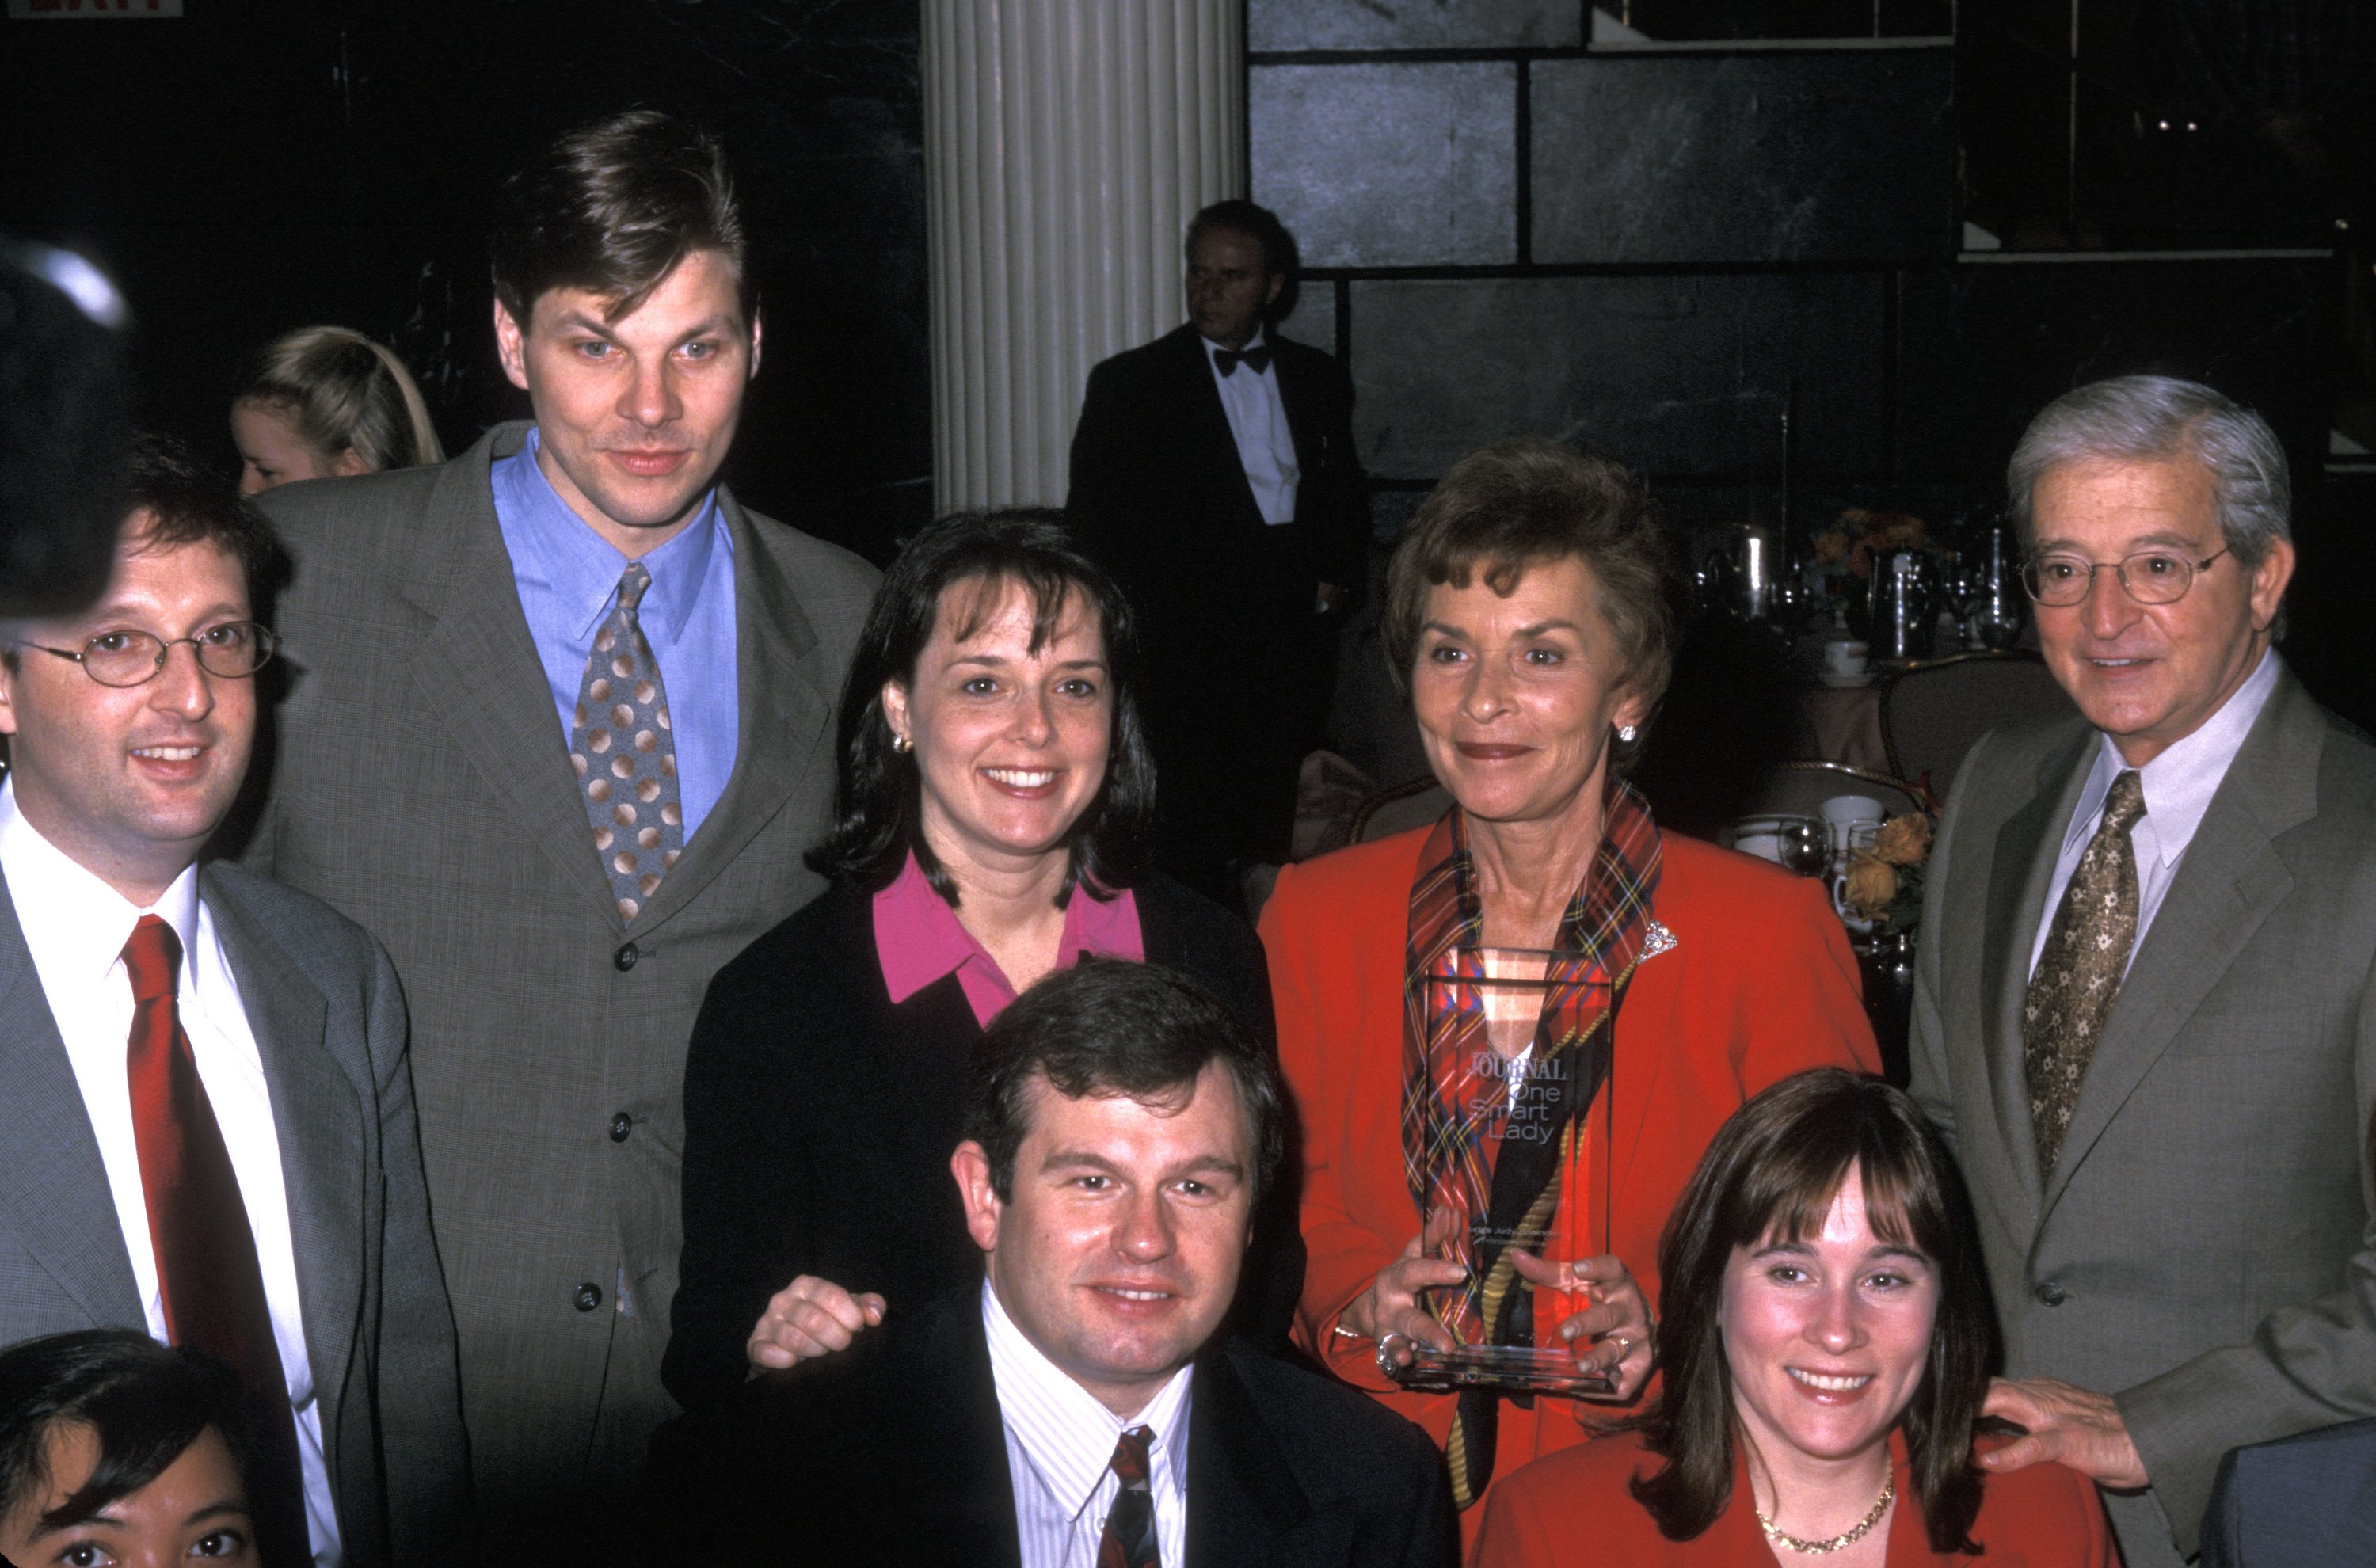 Judy Sheindlin, Jerry Sheindlin and family at Ladies' Home Journal "One Smart Lady Award" on February 23, 2000 at the Waldorf Astoria Hotel in New York City. | Source: Getty Images